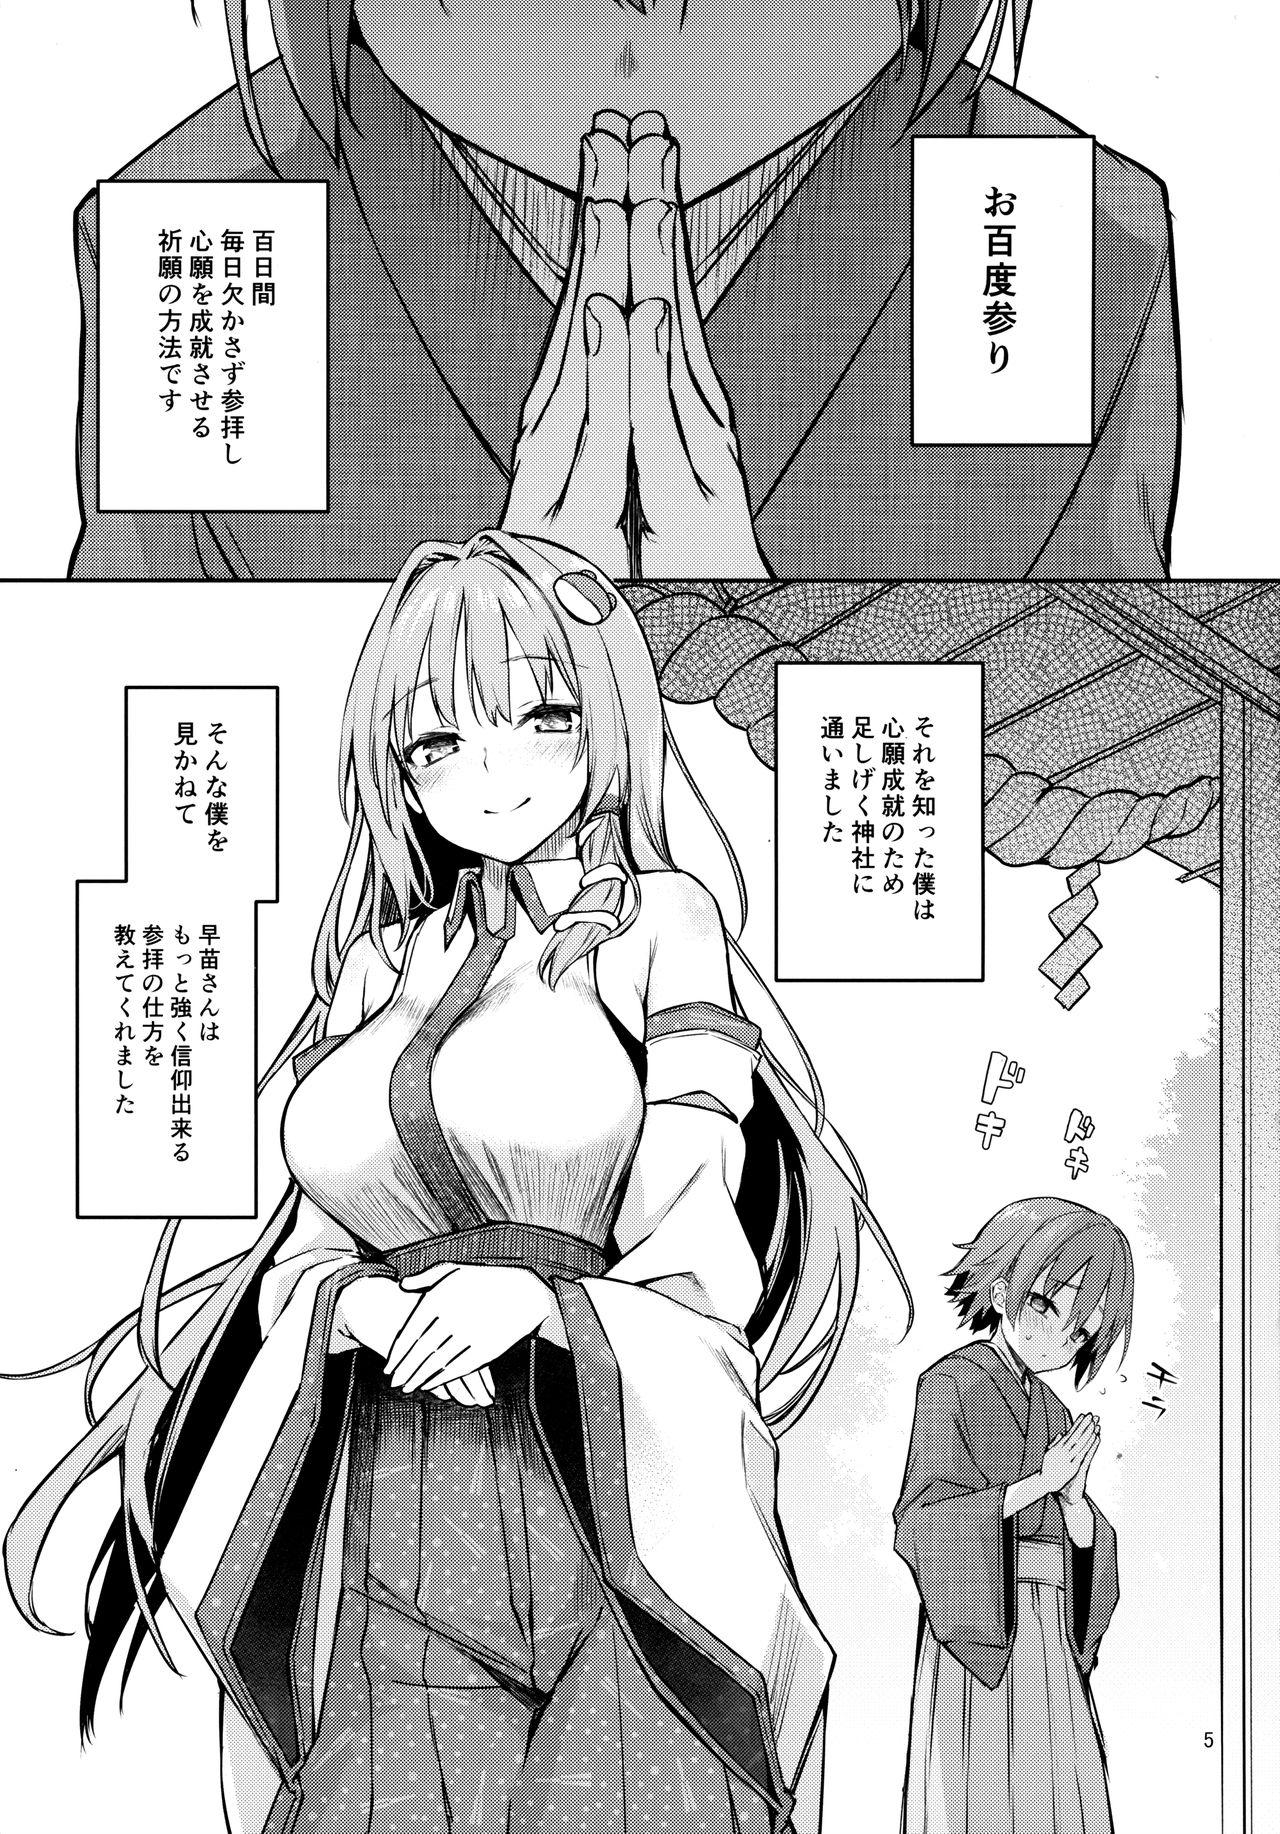 Amateurs ANMITSU TOUHOU THE AFTER Vol.2 - Touhou project Breasts - Page 4